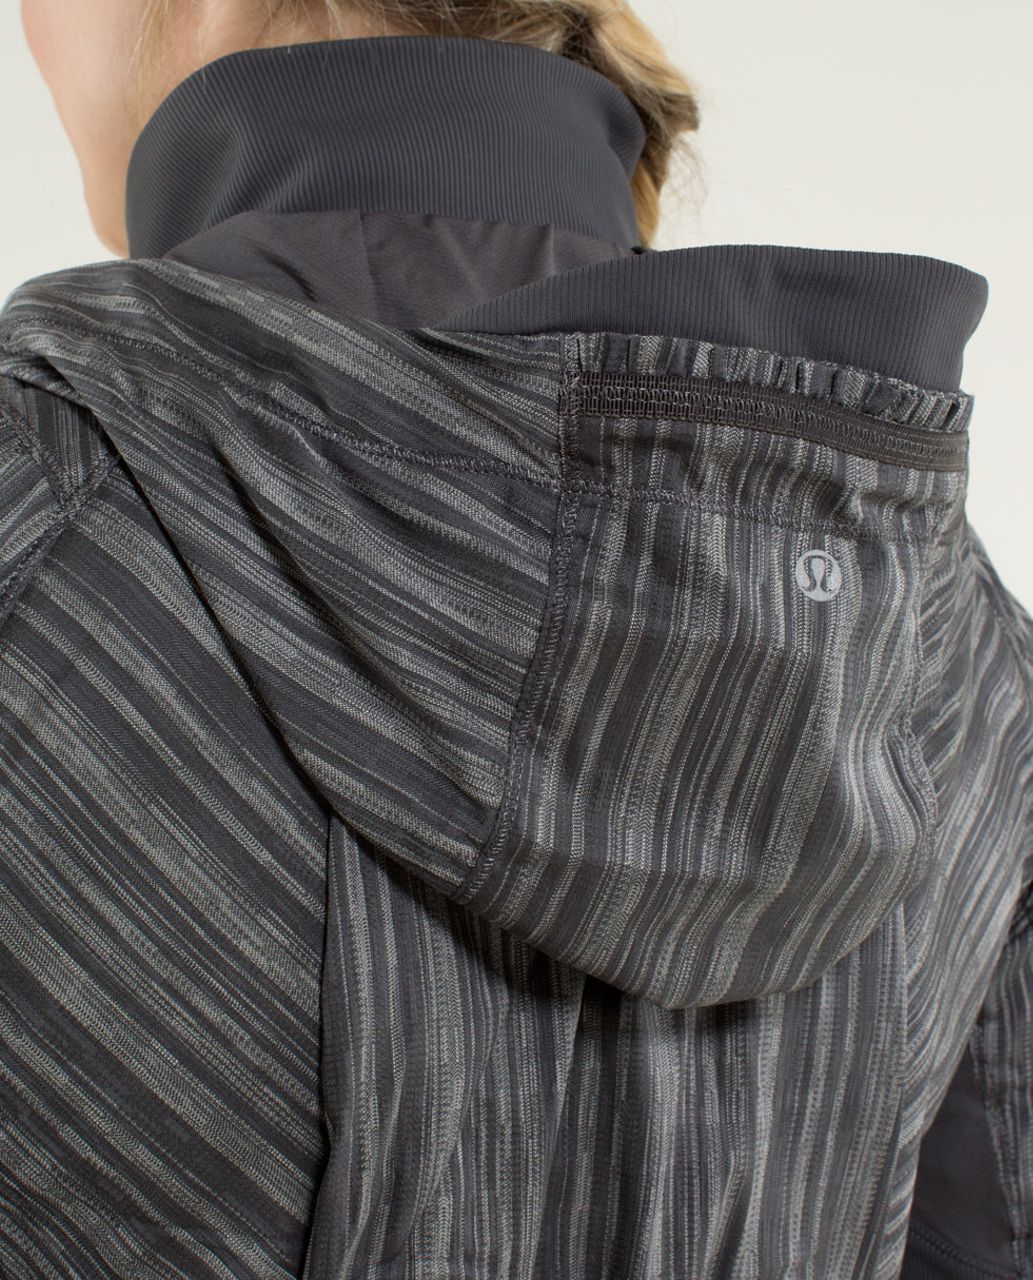 Lululemon She's Swift Jacket - Wee Are From Space Reflective October Angel Wing / Soot Light